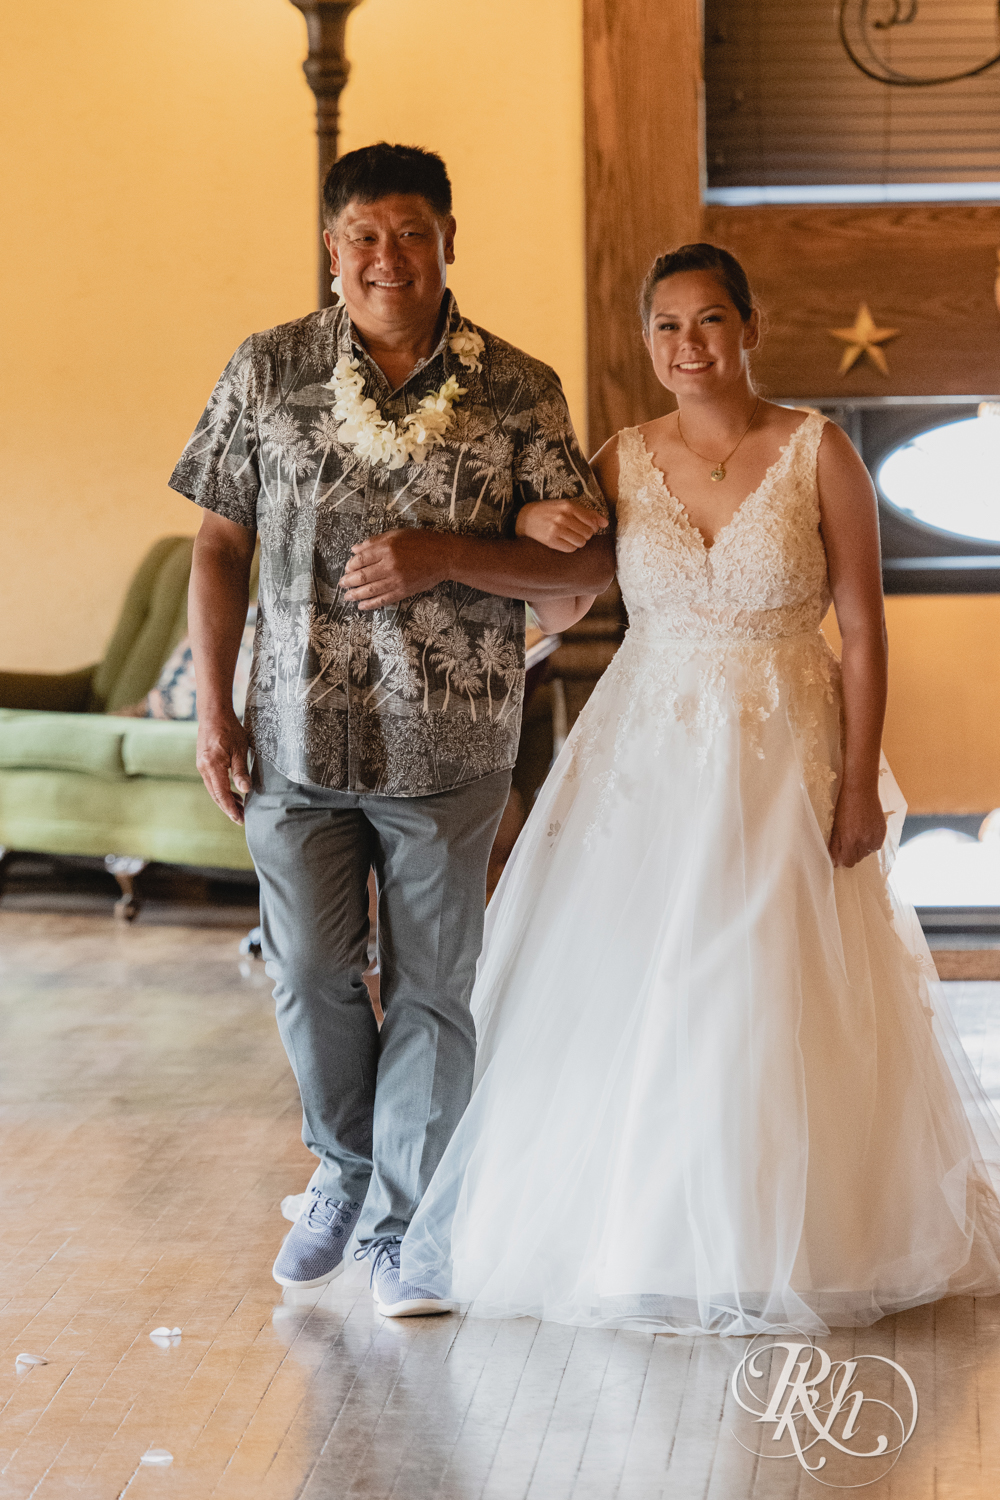 Bride walks down the aisle with her dad in a Hawaiian shirt at Kellerman's Event Center in White Bear Lake, Minnesota.